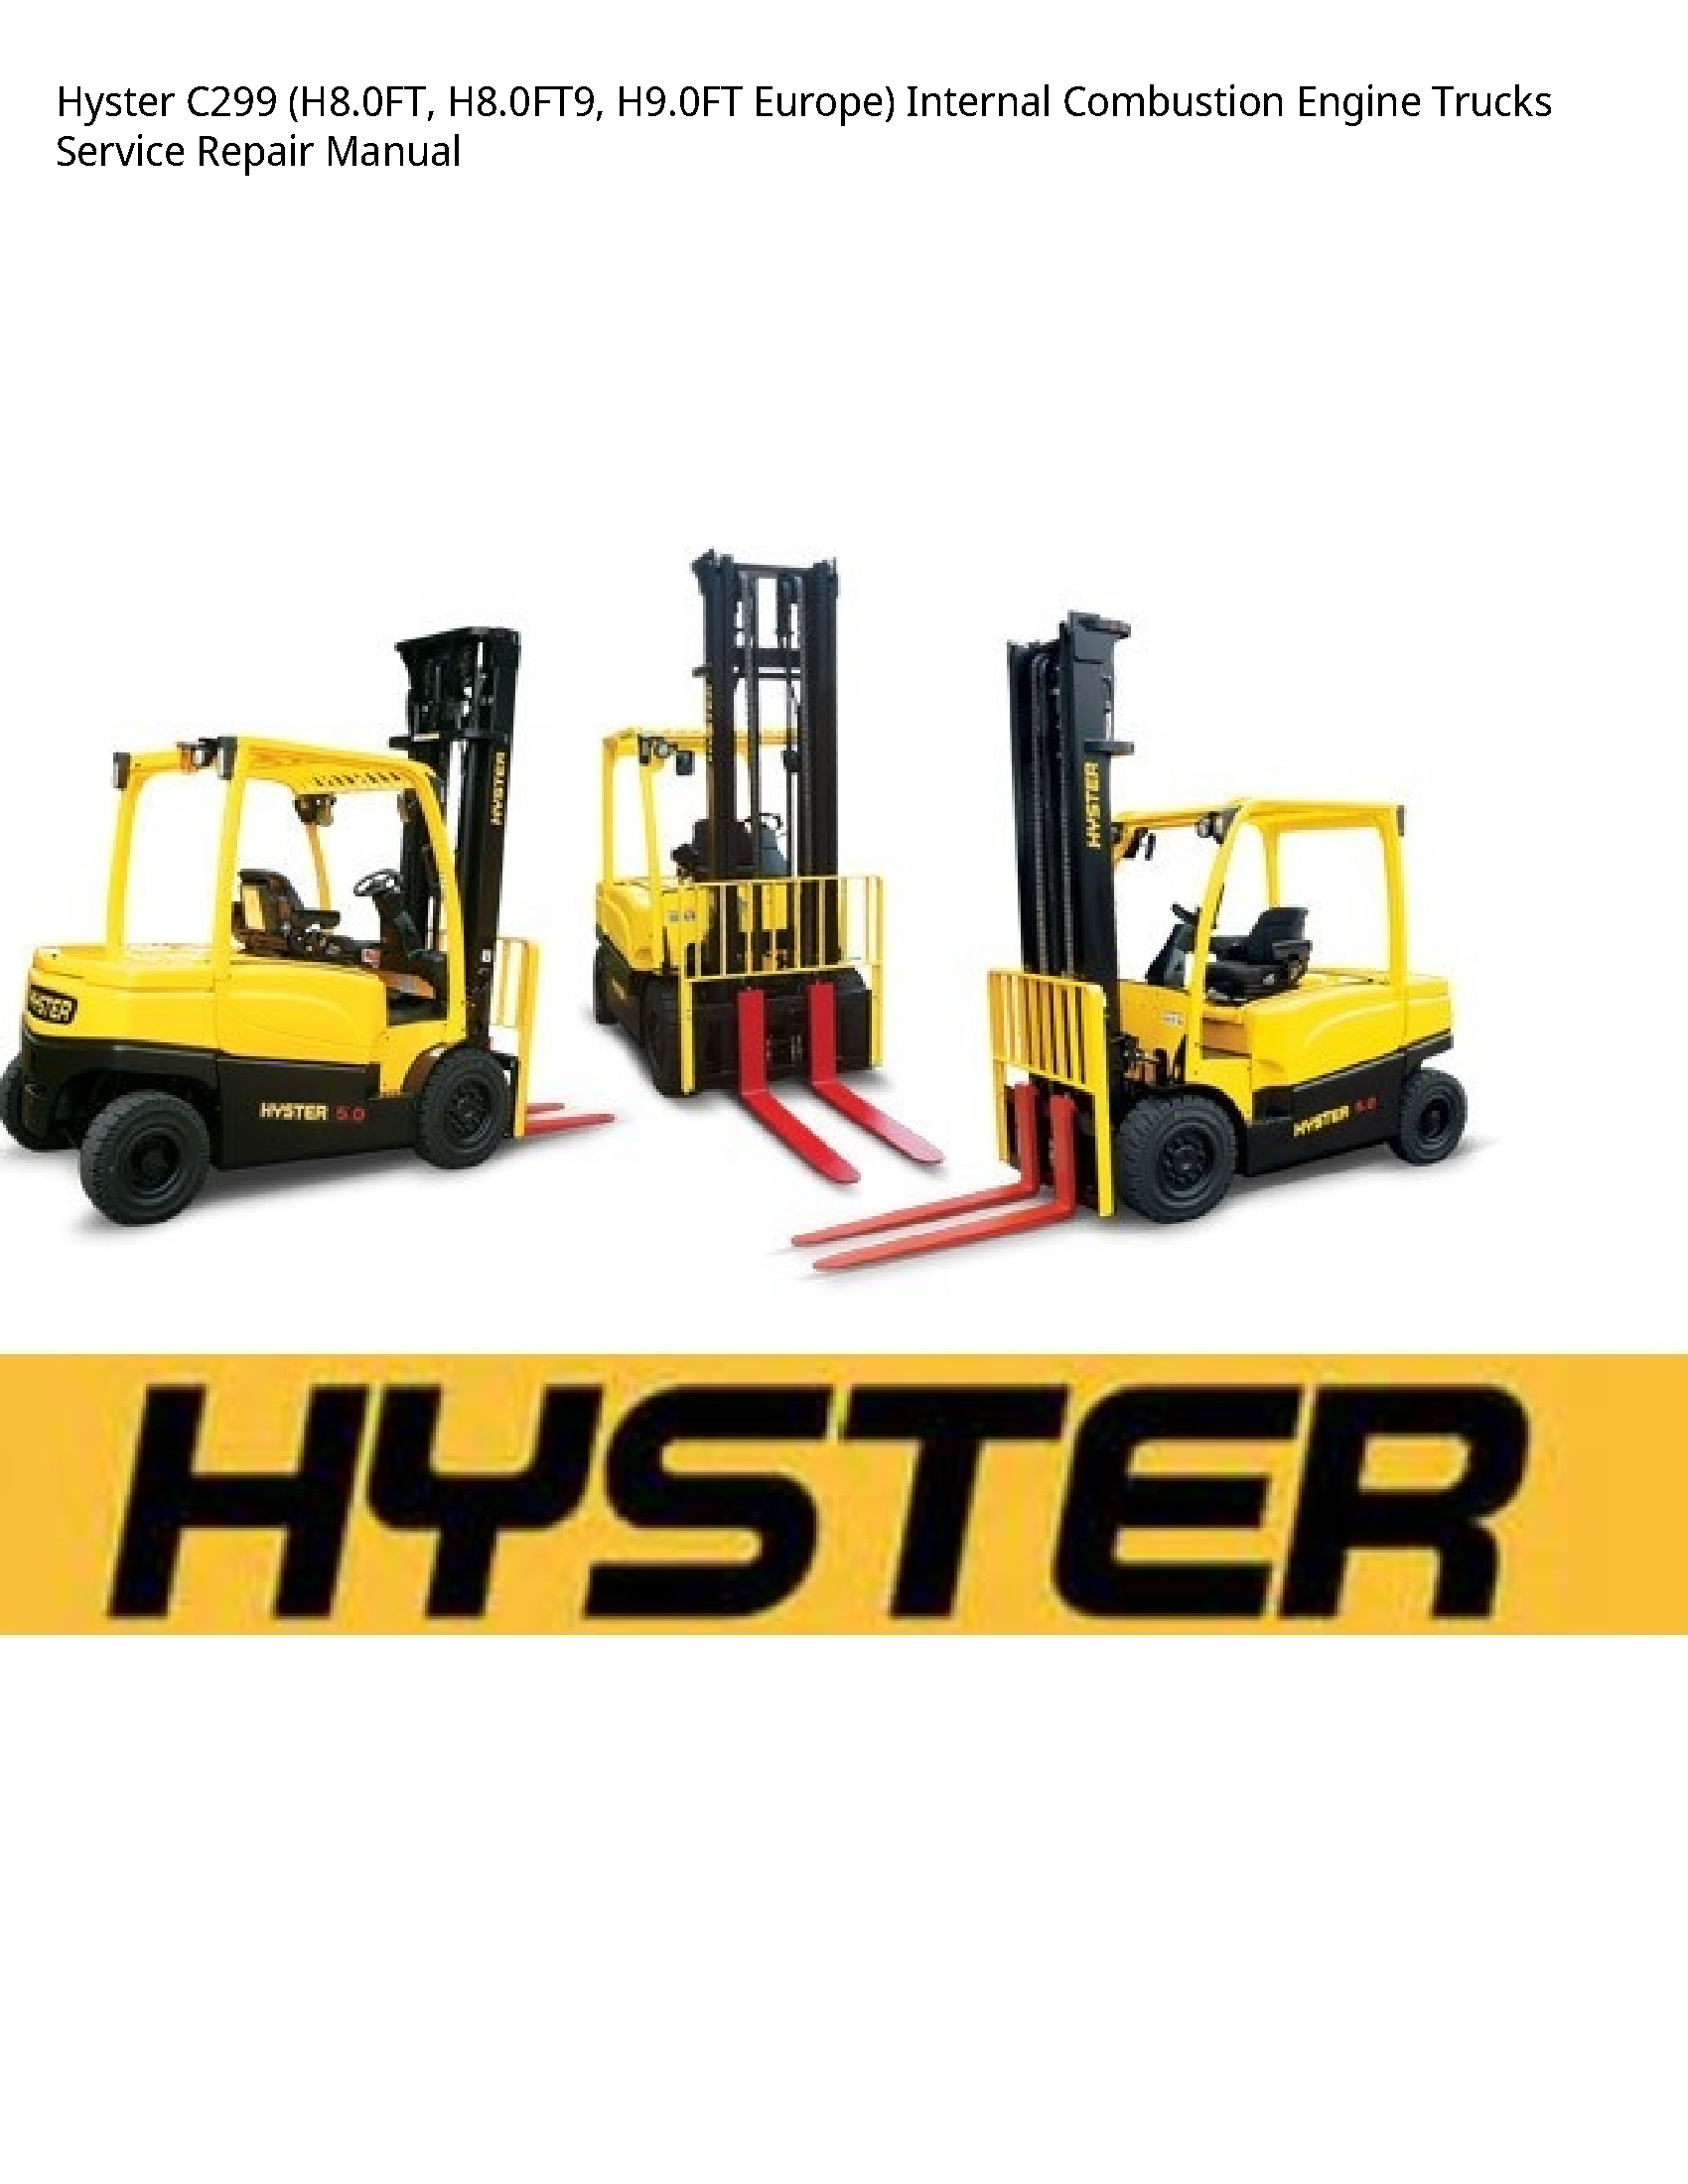 Hyster C299 Europe) Internal Combustion Engine Trucks manual